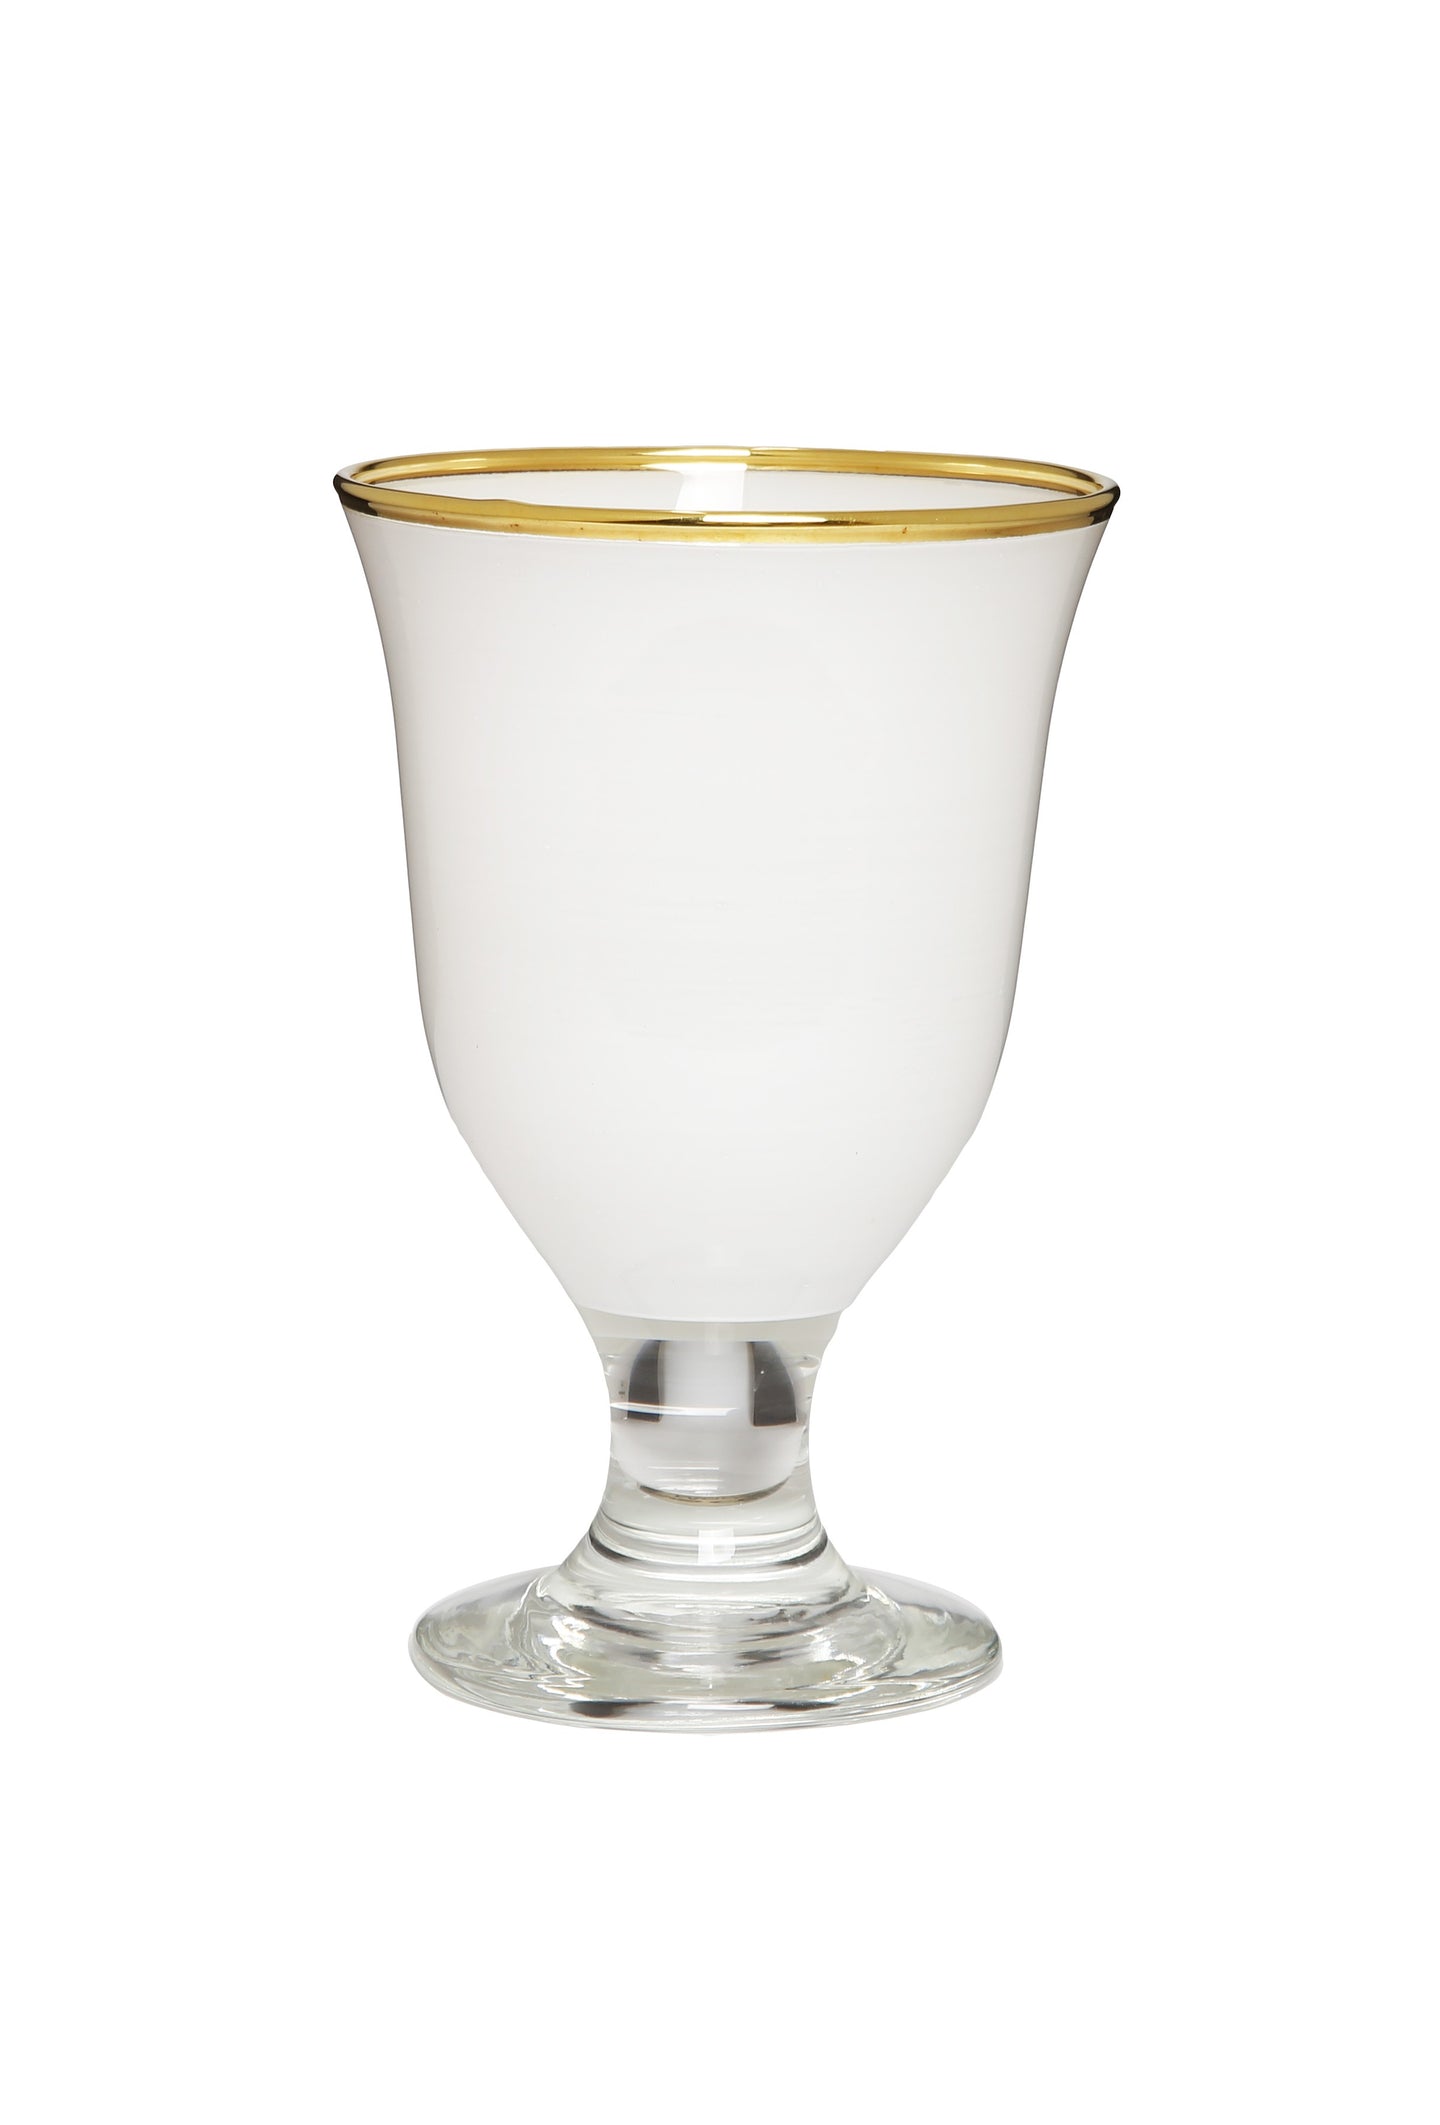 Crystal Water Glasses Gold Rim Transparency Glass Cups For Coffee